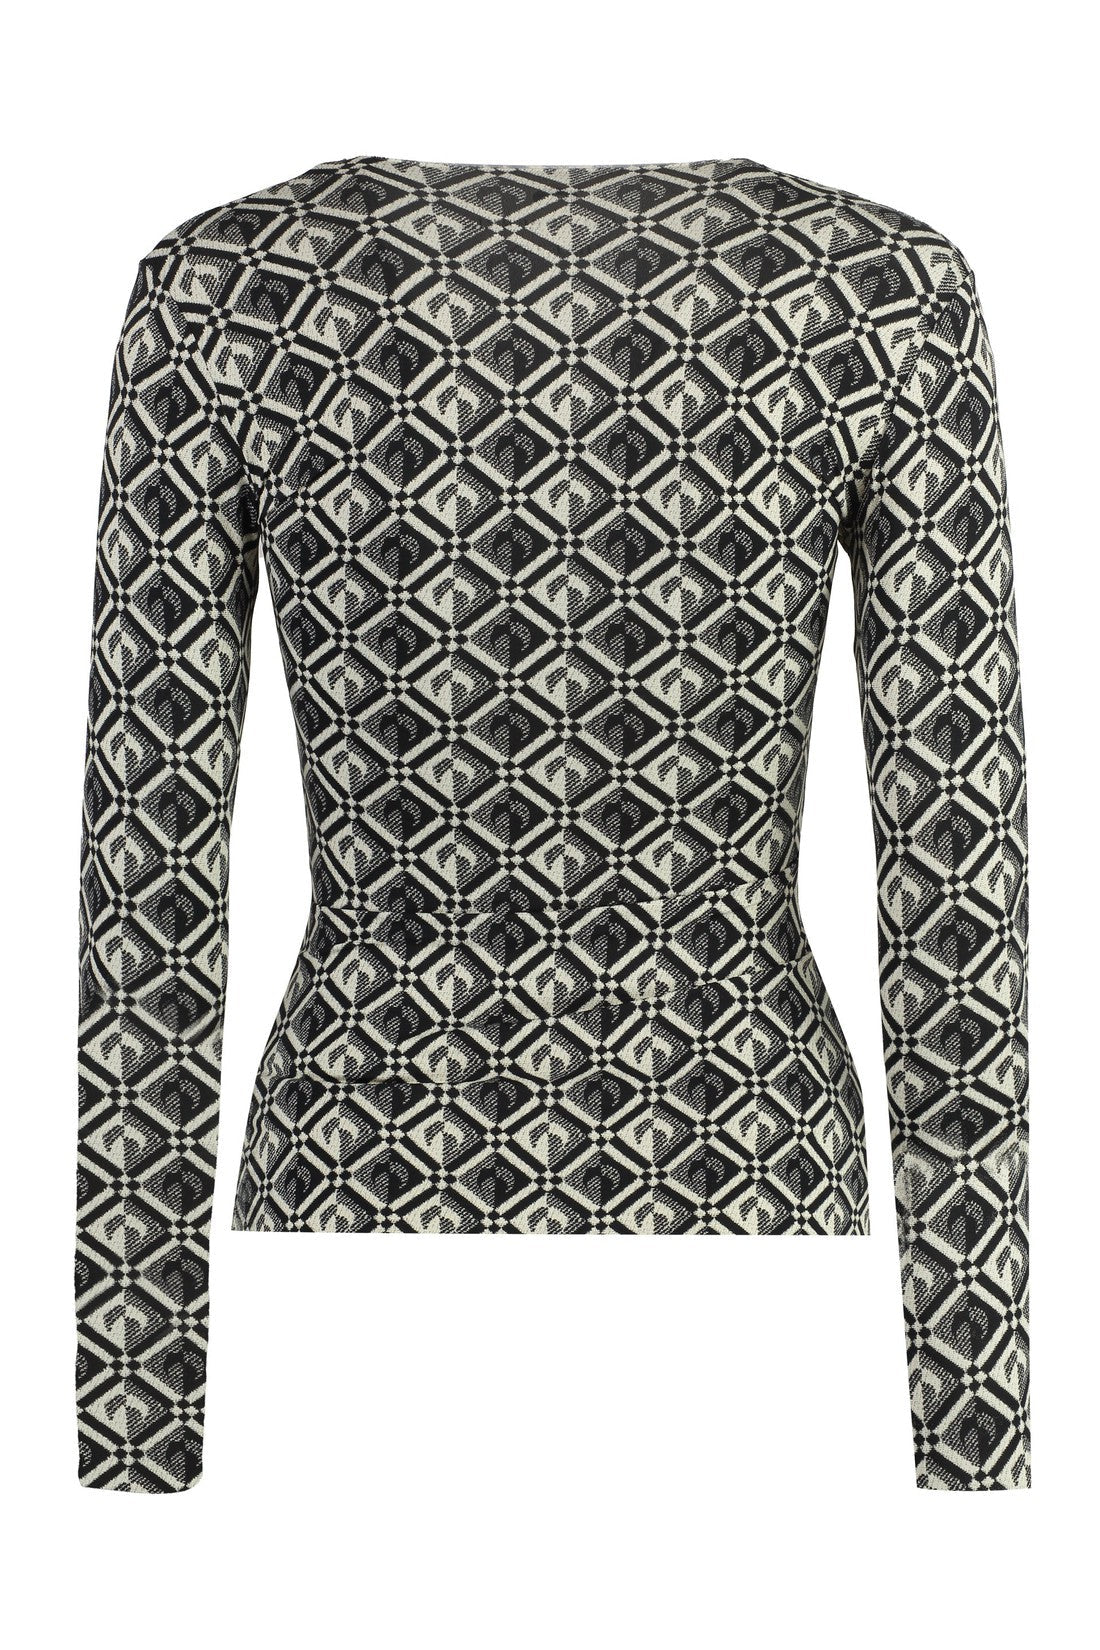 Marine Serre-OUTLET-SALE-Printed long-sleeve top-ARCHIVIST